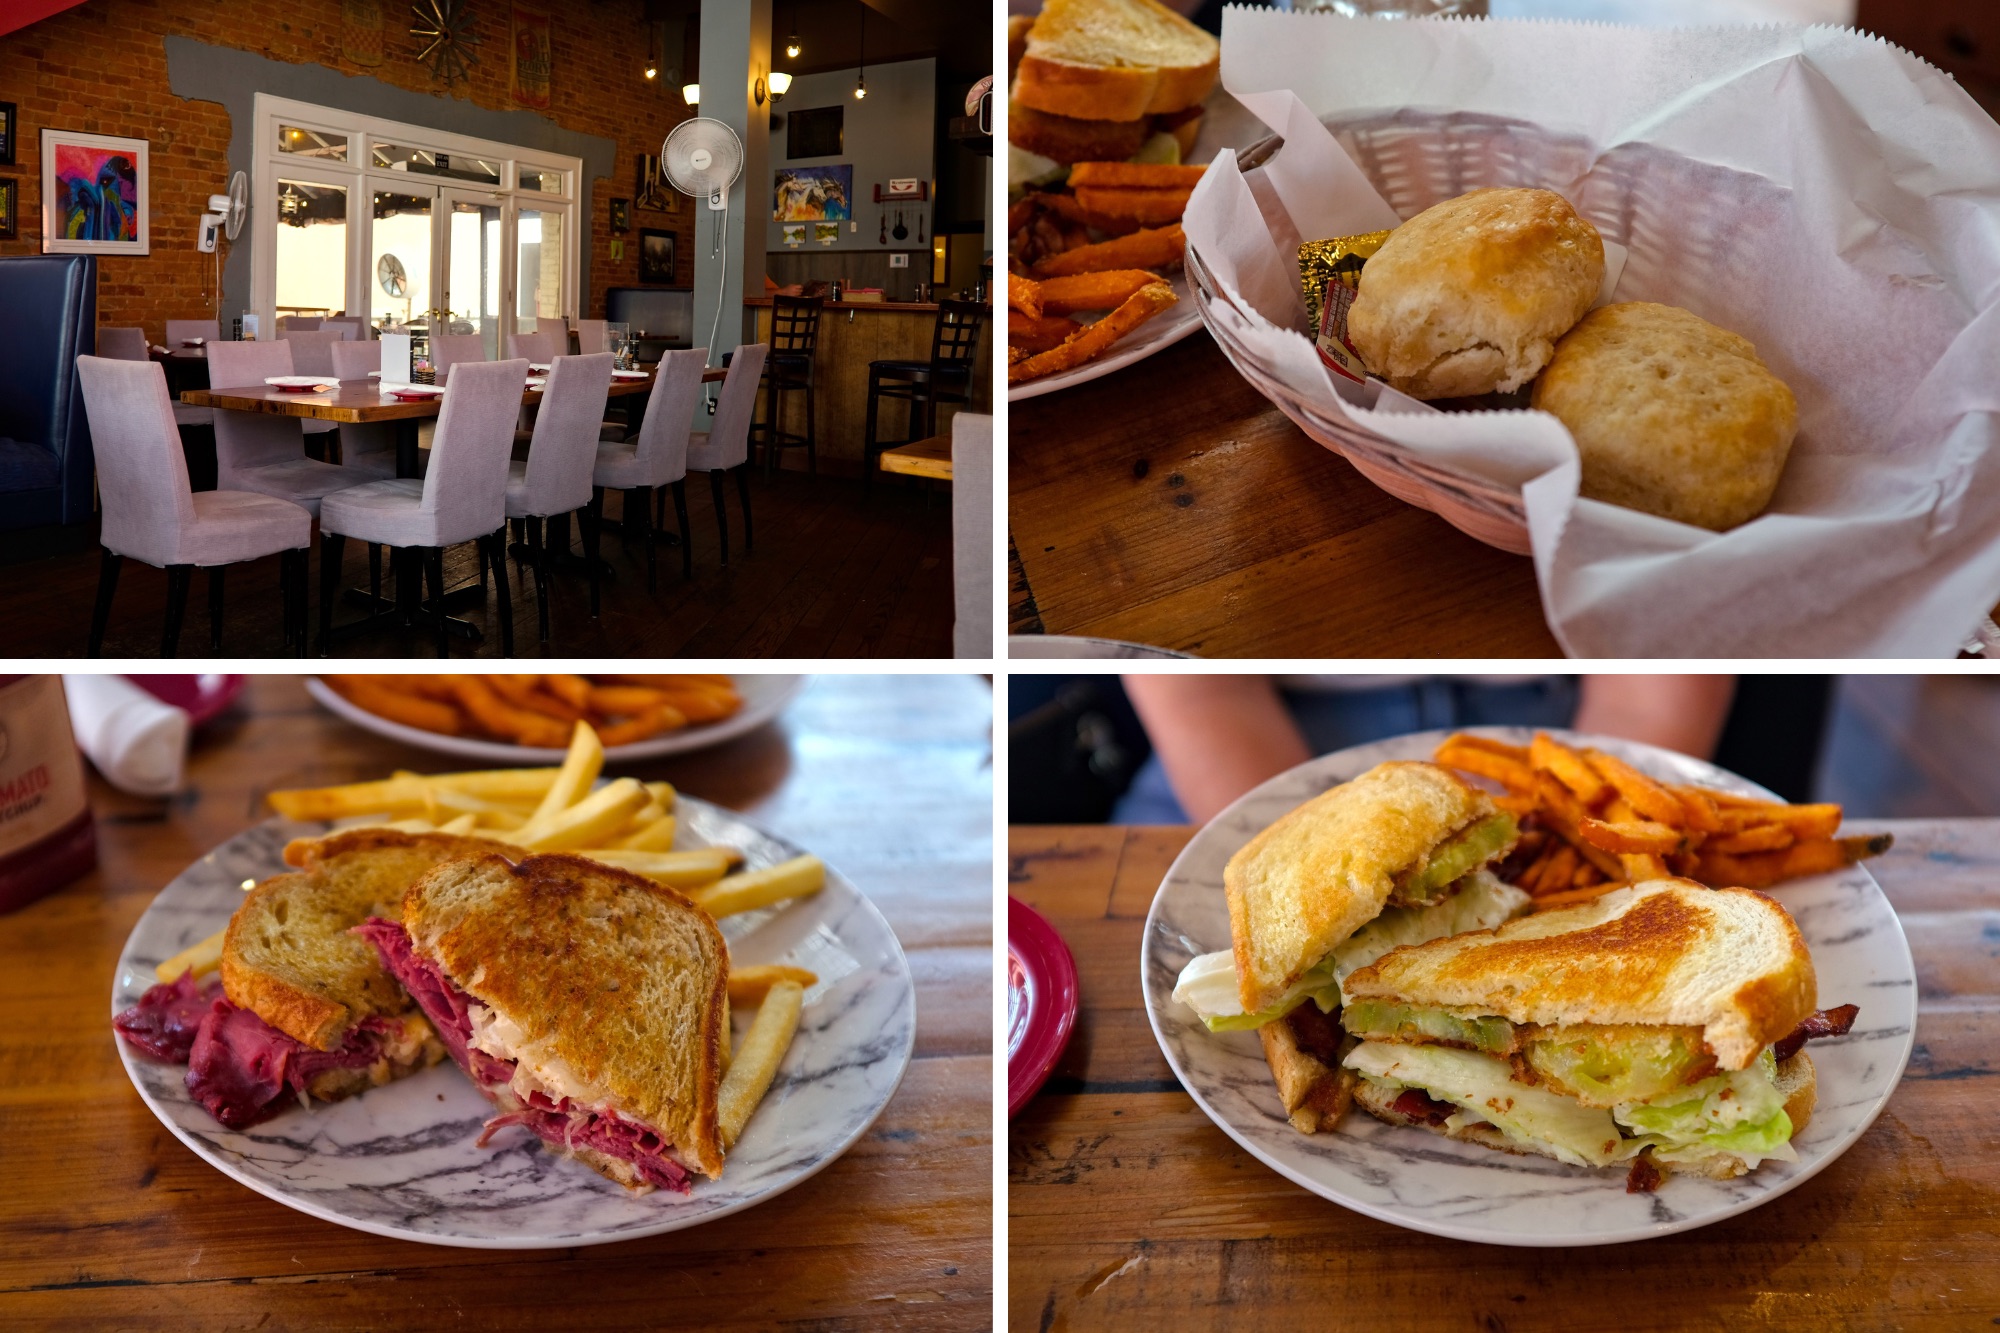 The interior of Southern on Main, a basket of biscuits, and two sandwiches